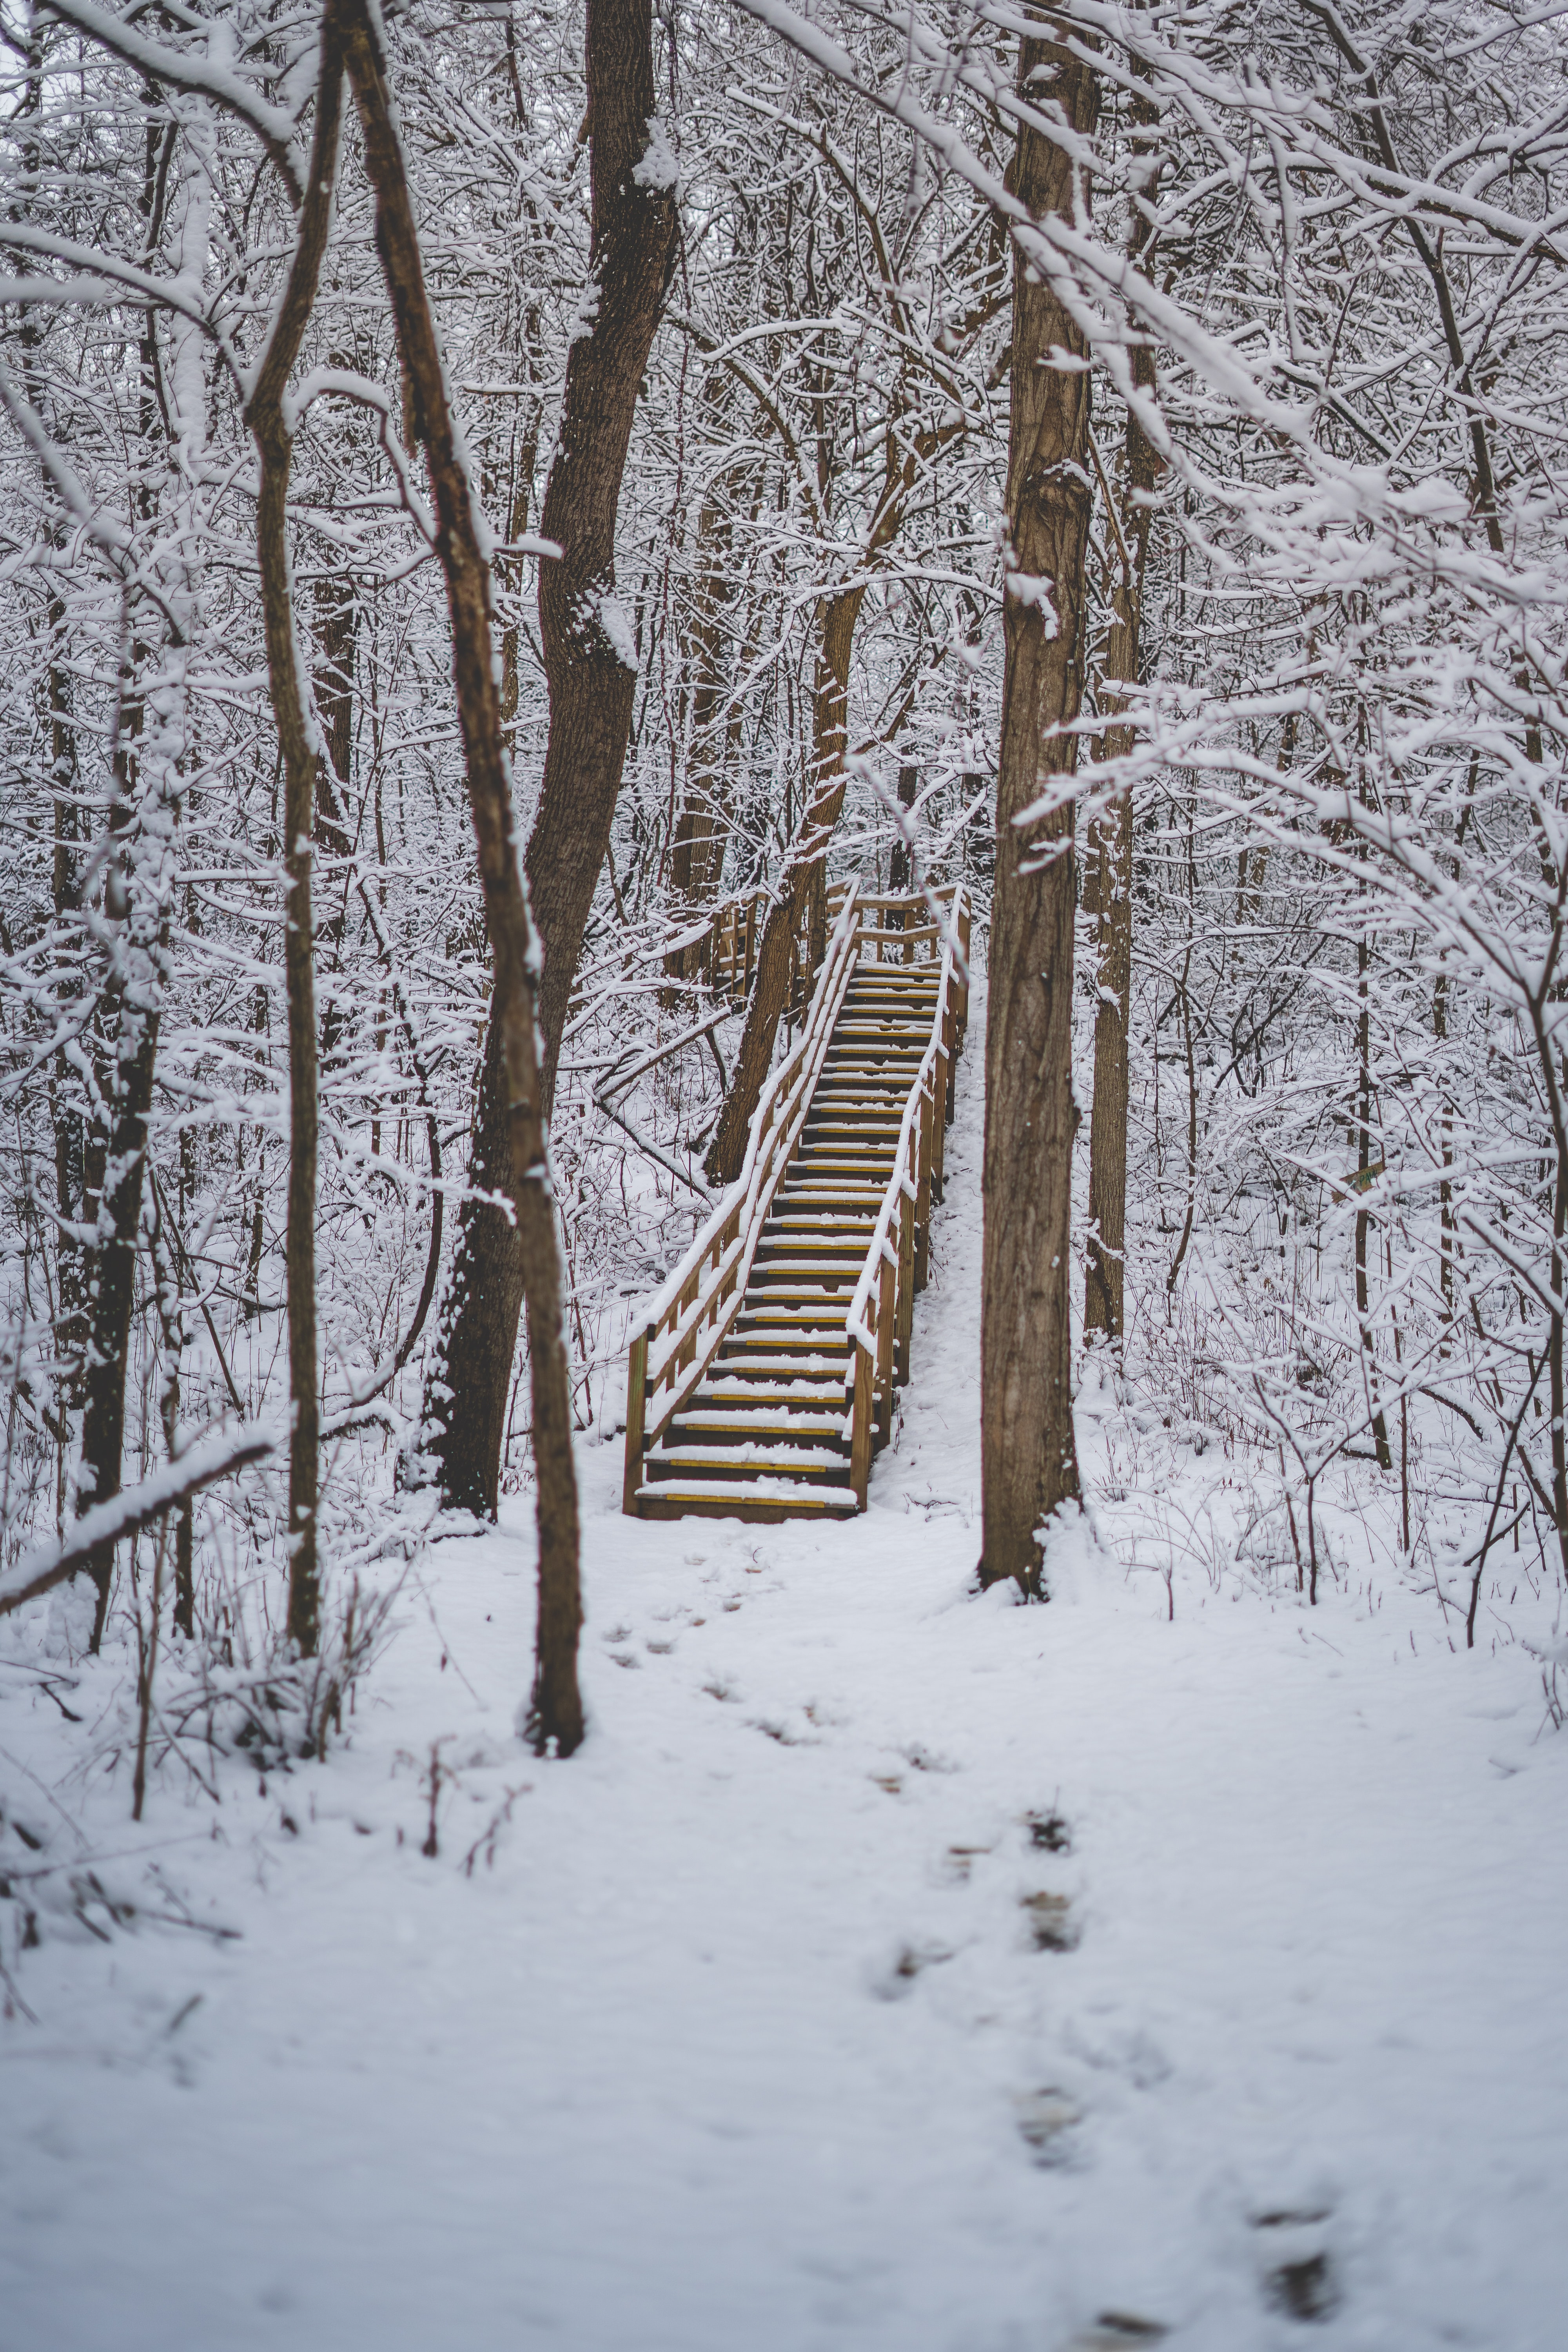 snow, nature, trees, forest, stairs, ladder